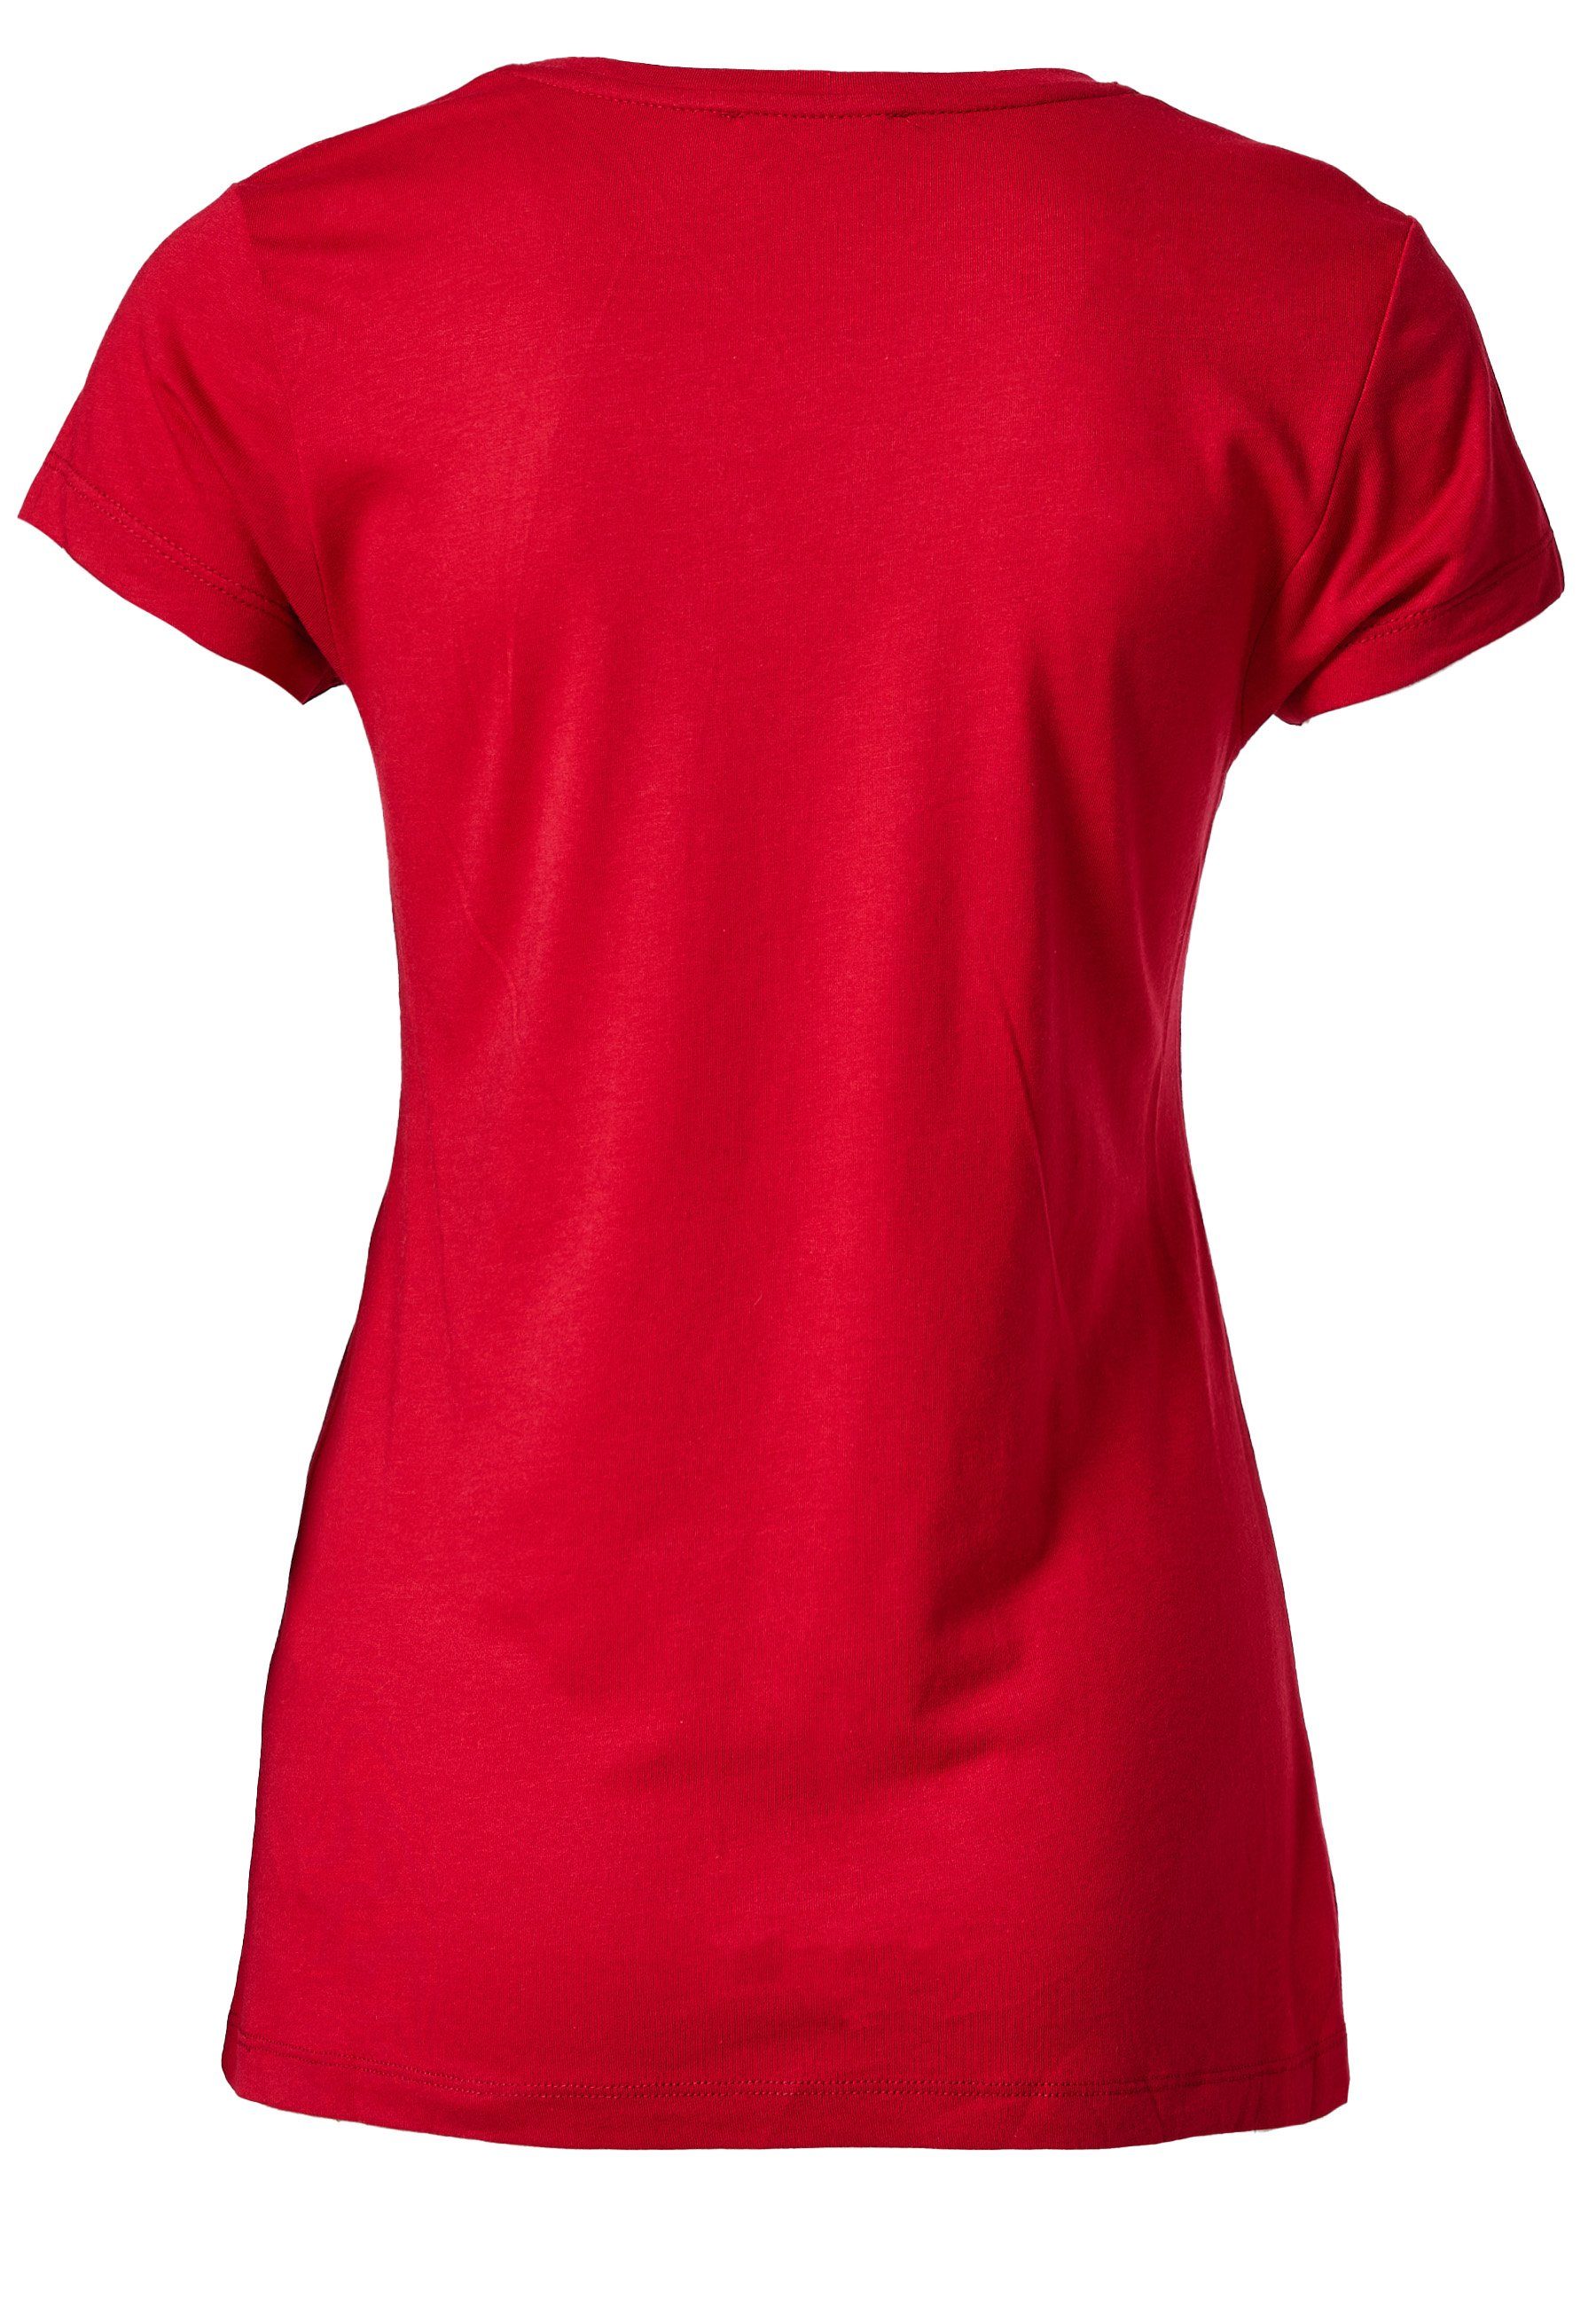 Decay T-Shirt mit rot Front-Print